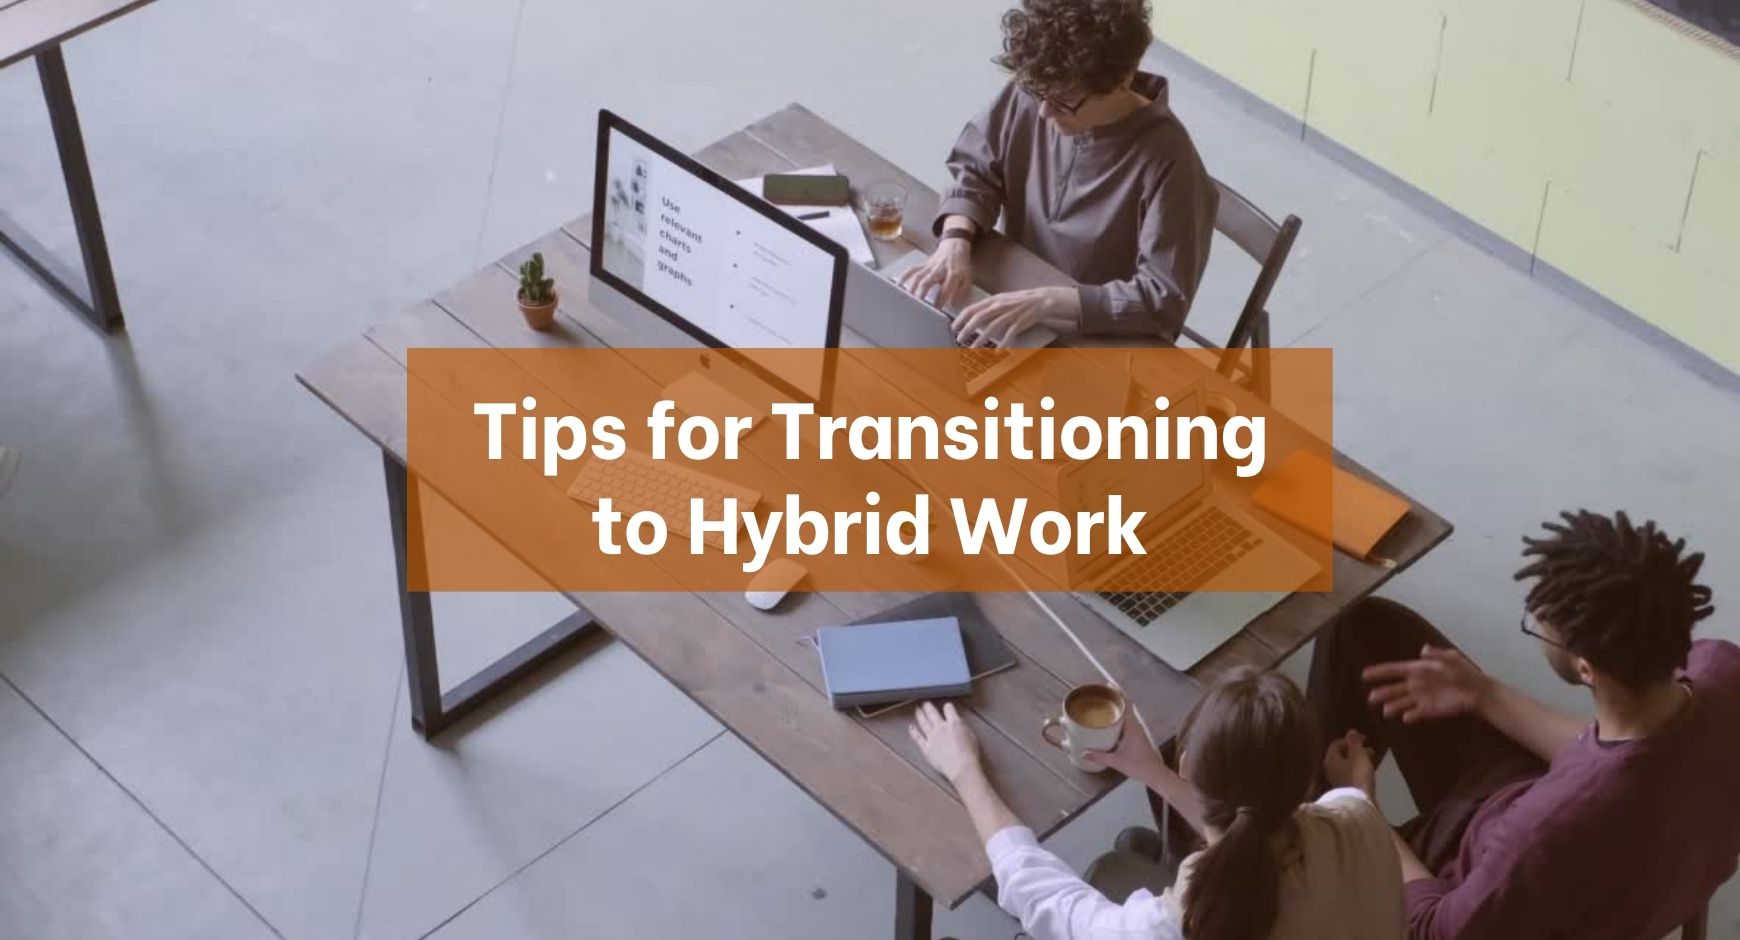 Tips for Transitioning to Hybrid Work